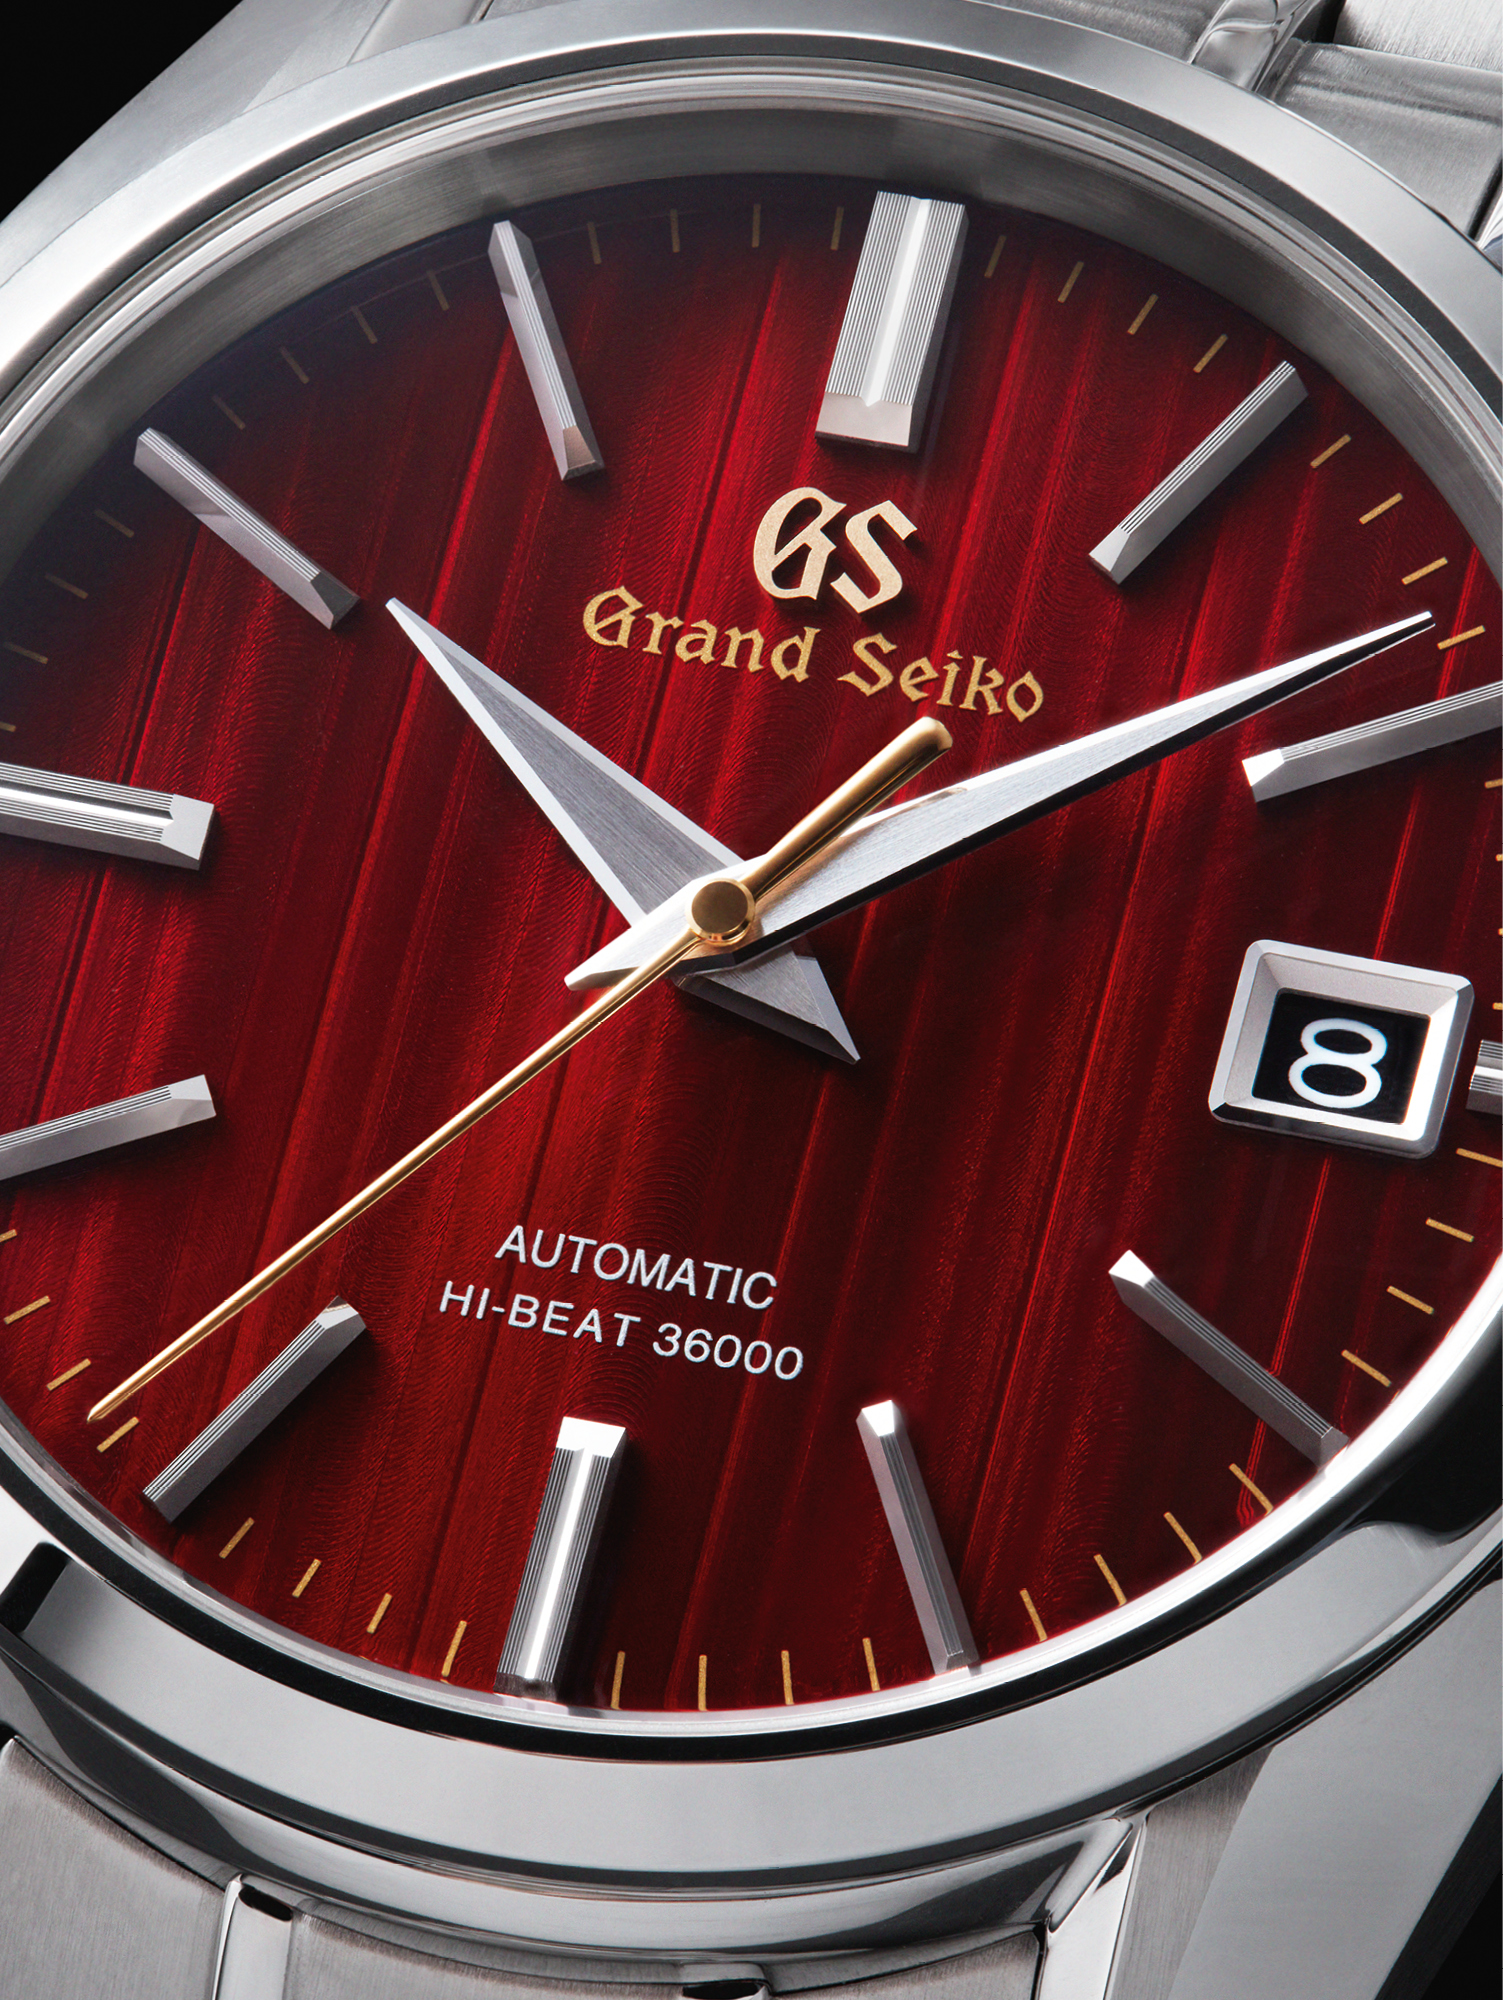 Expressing the scenery of autumn in Japan, the Limited Edition Grand Seiko Heritage incorporates 37 jewels and a date display on the dial and a serial number engraved on the case back. £6,000, GRAND SEIKO